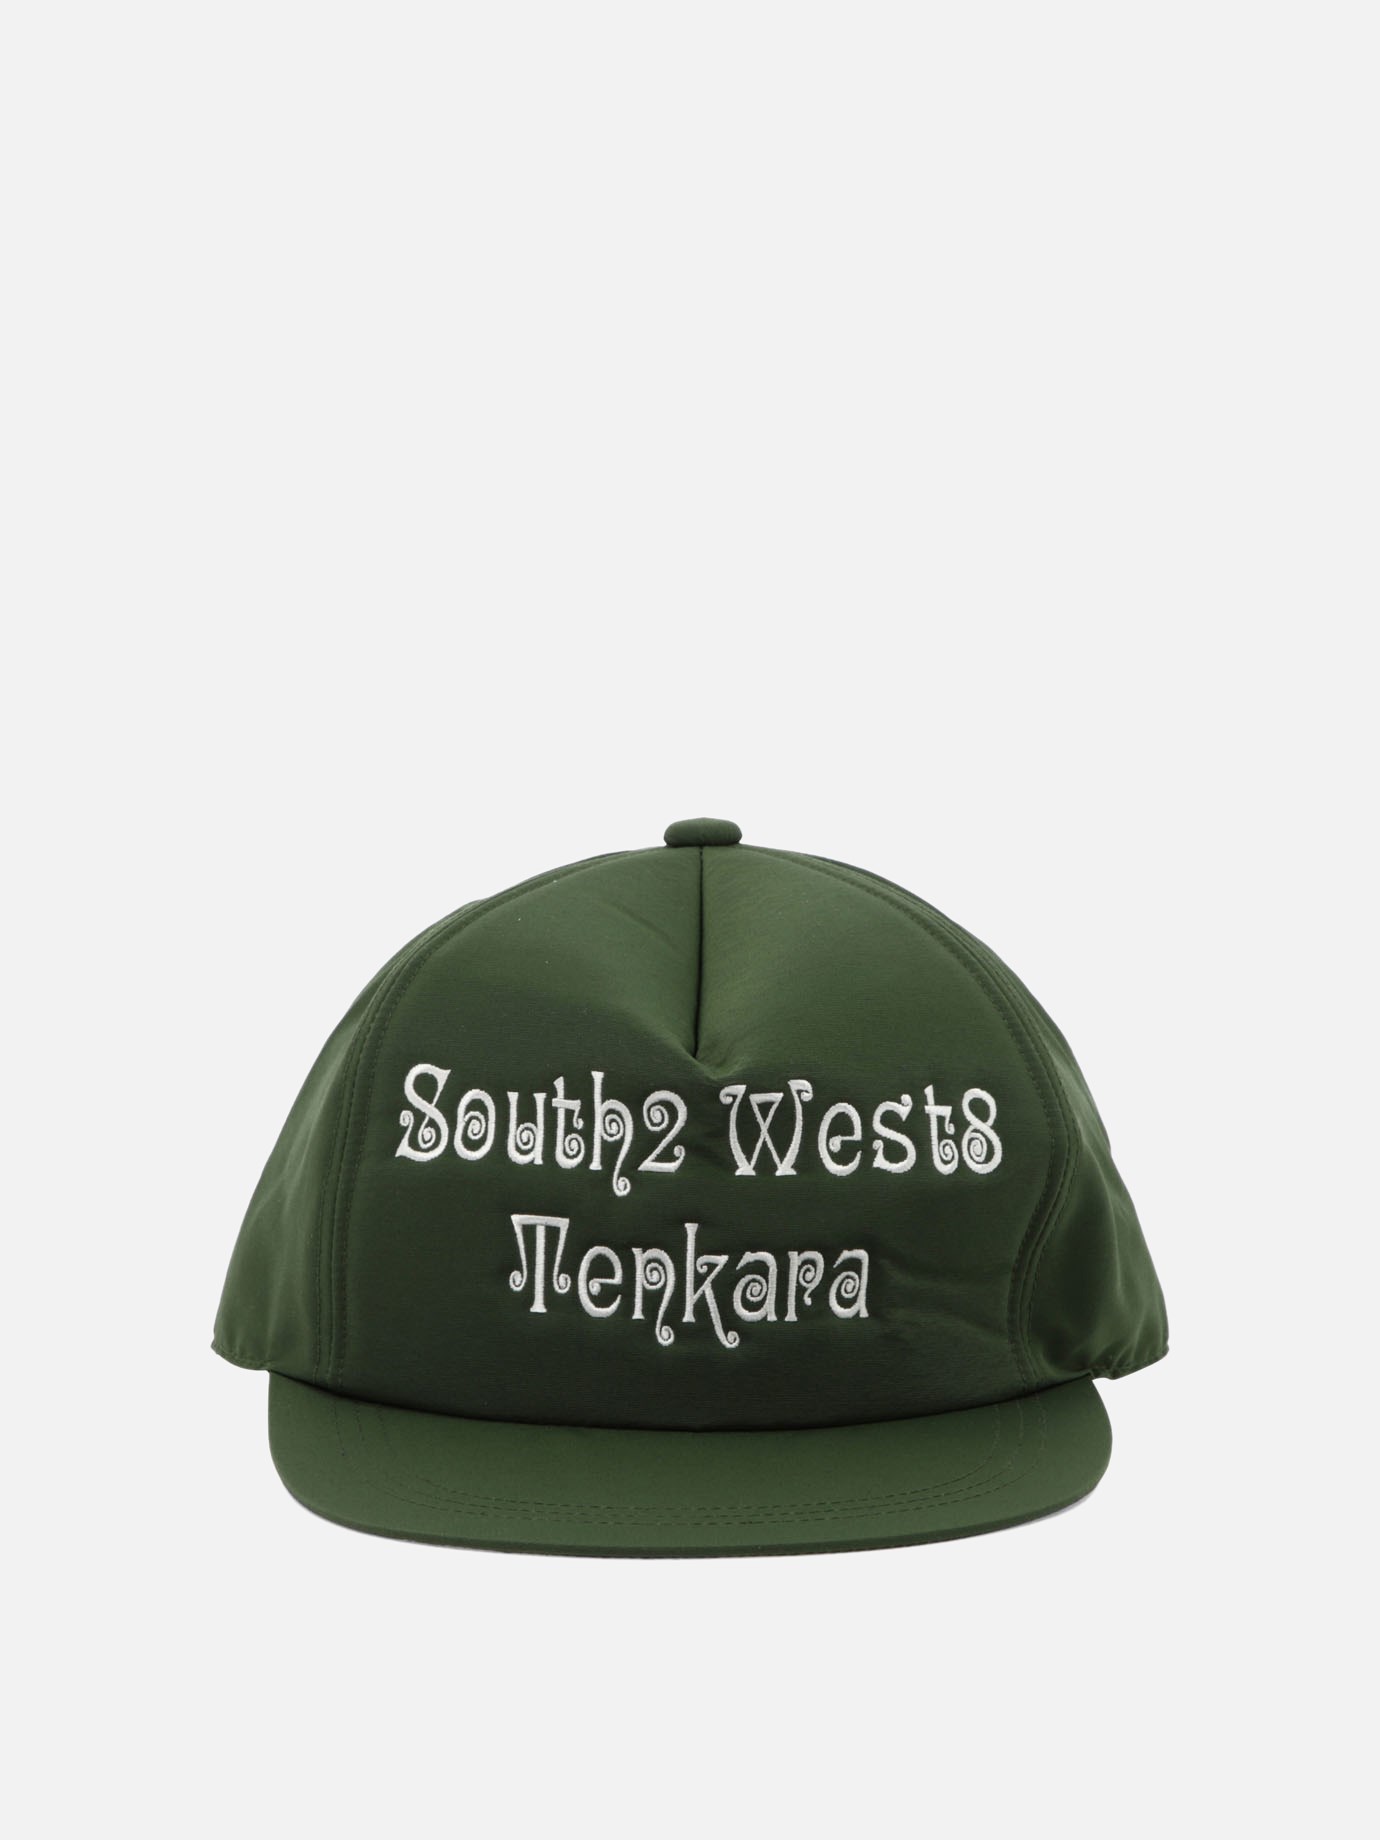 Embroidered baseball capby South2 West8 - 1